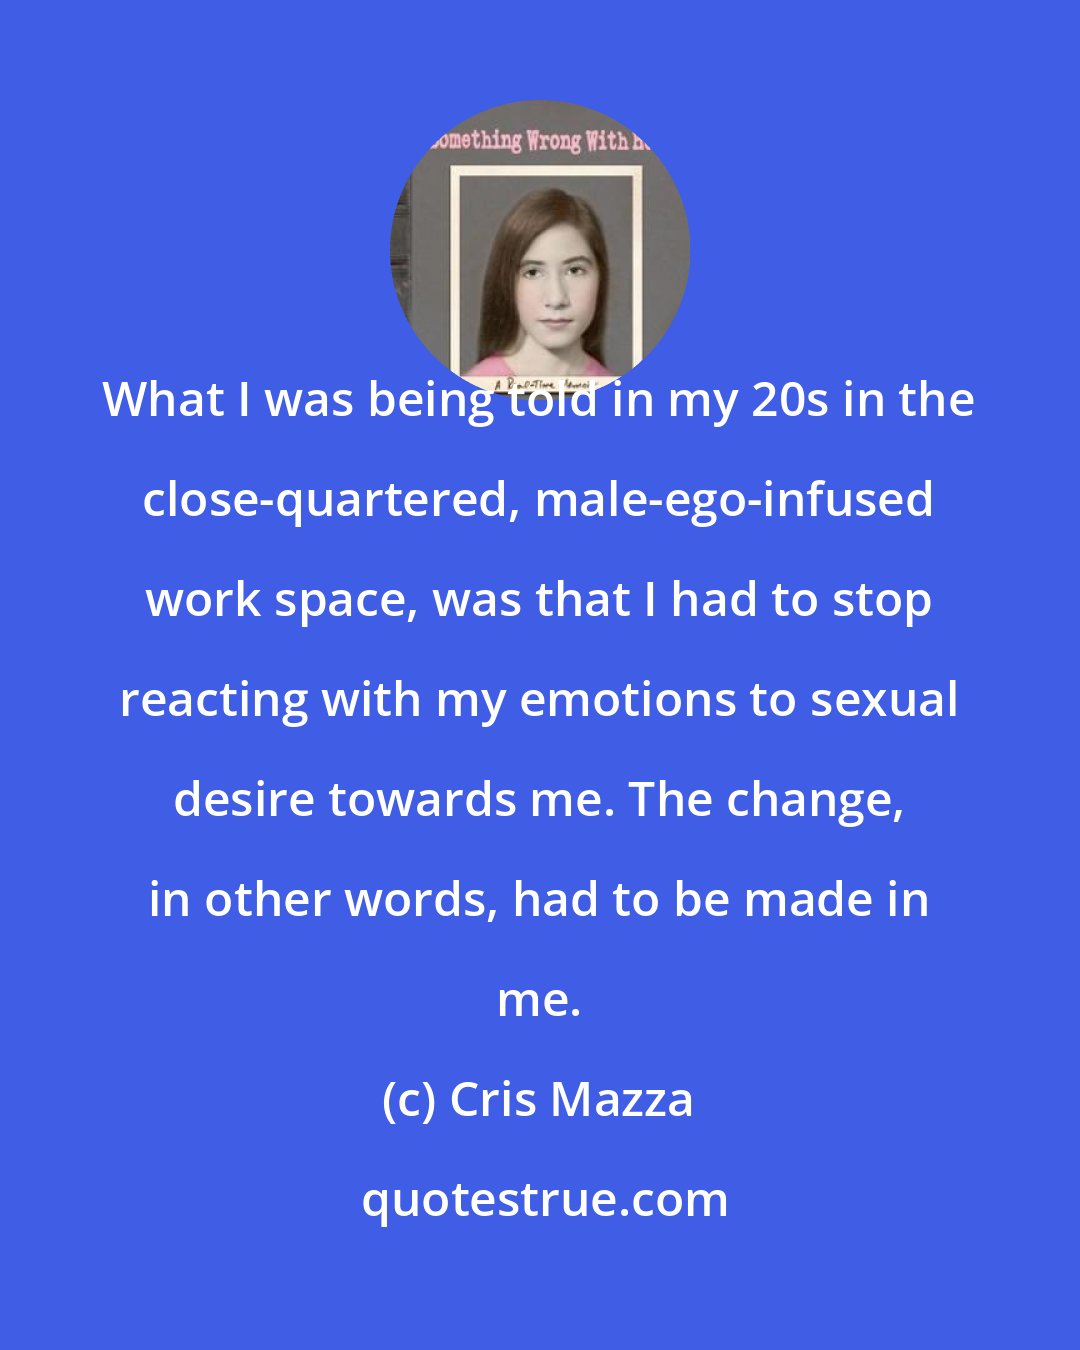 Cris Mazza: What I was being told in my 20s in the close-quartered, male-ego-infused work space, was that I had to stop reacting with my emotions to sexual desire towards me. The change, in other words, had to be made in me.